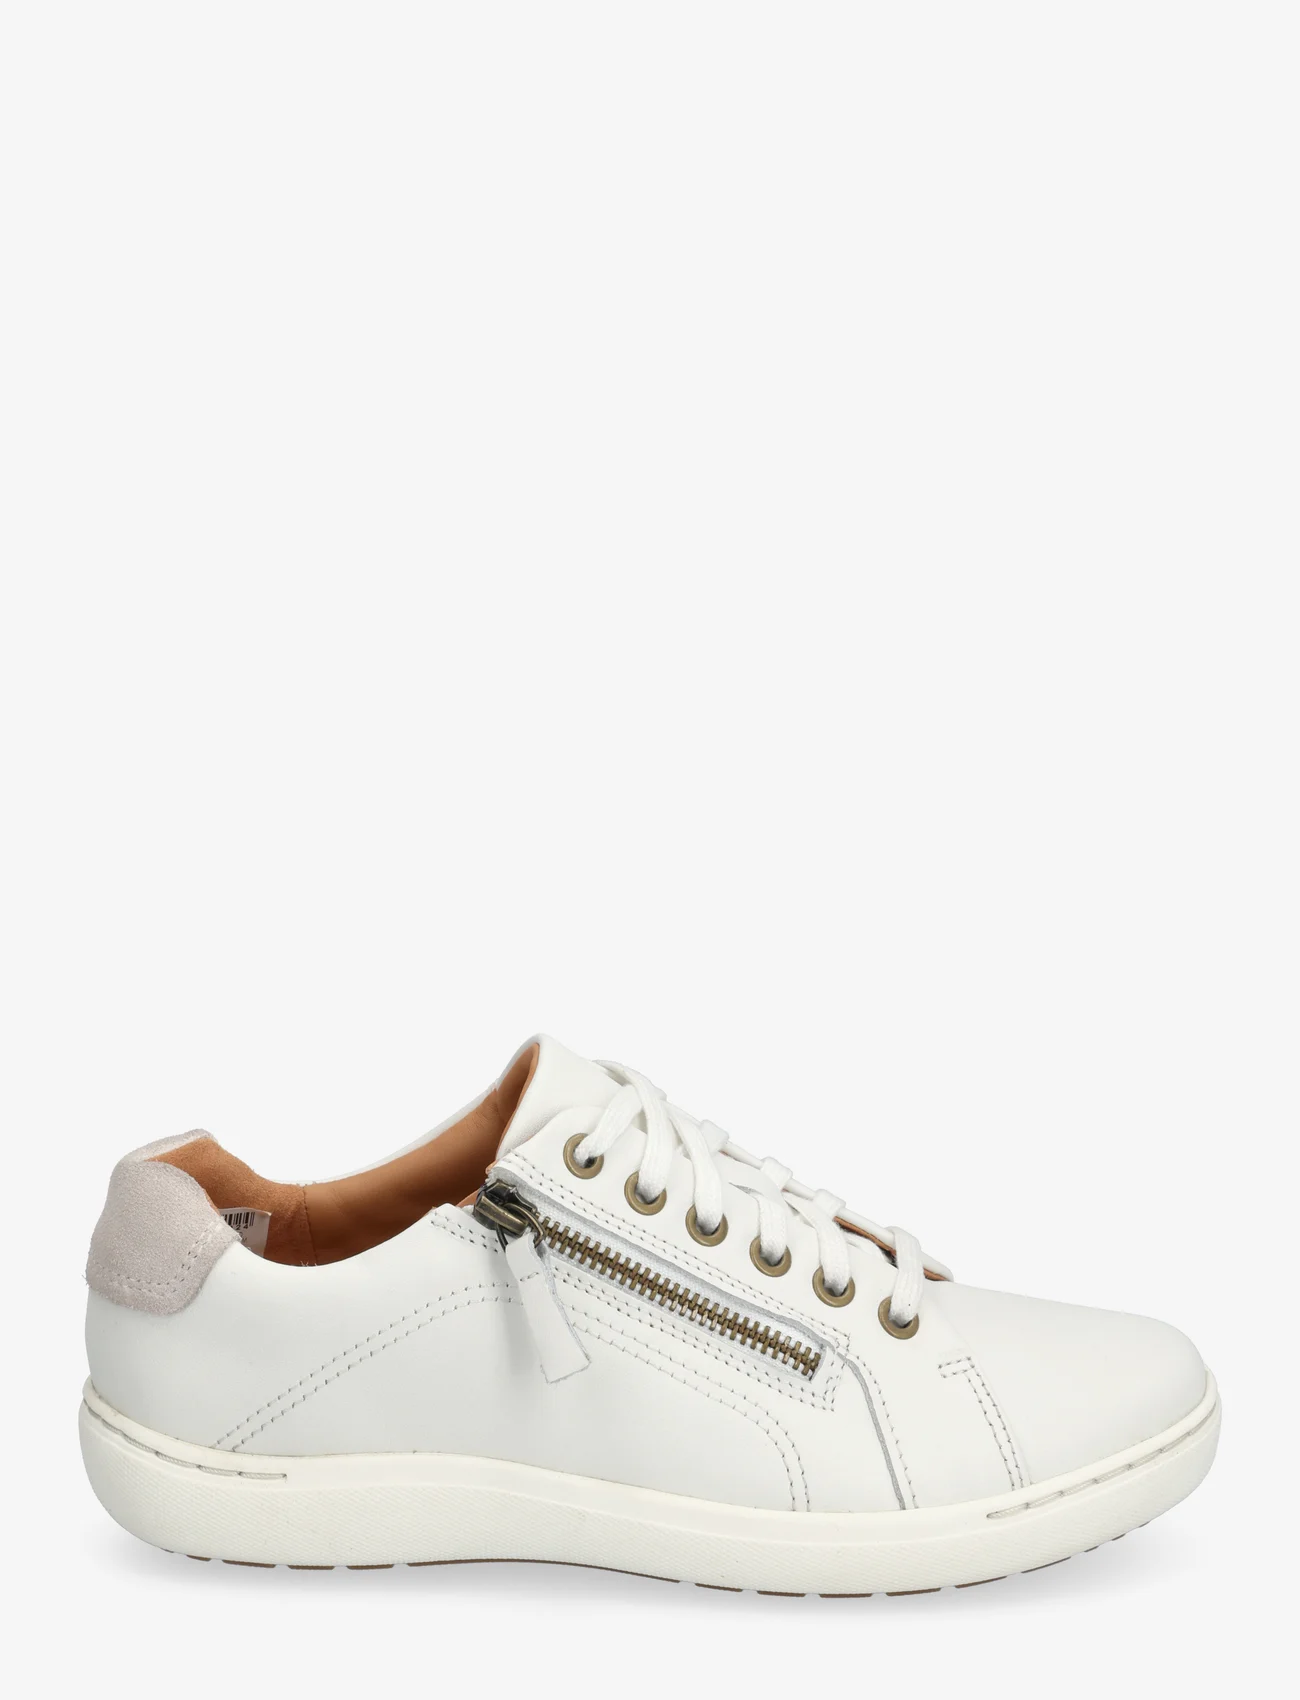 Clarks - Nalle Lace D - low top sneakers - 1255 white leather - 1